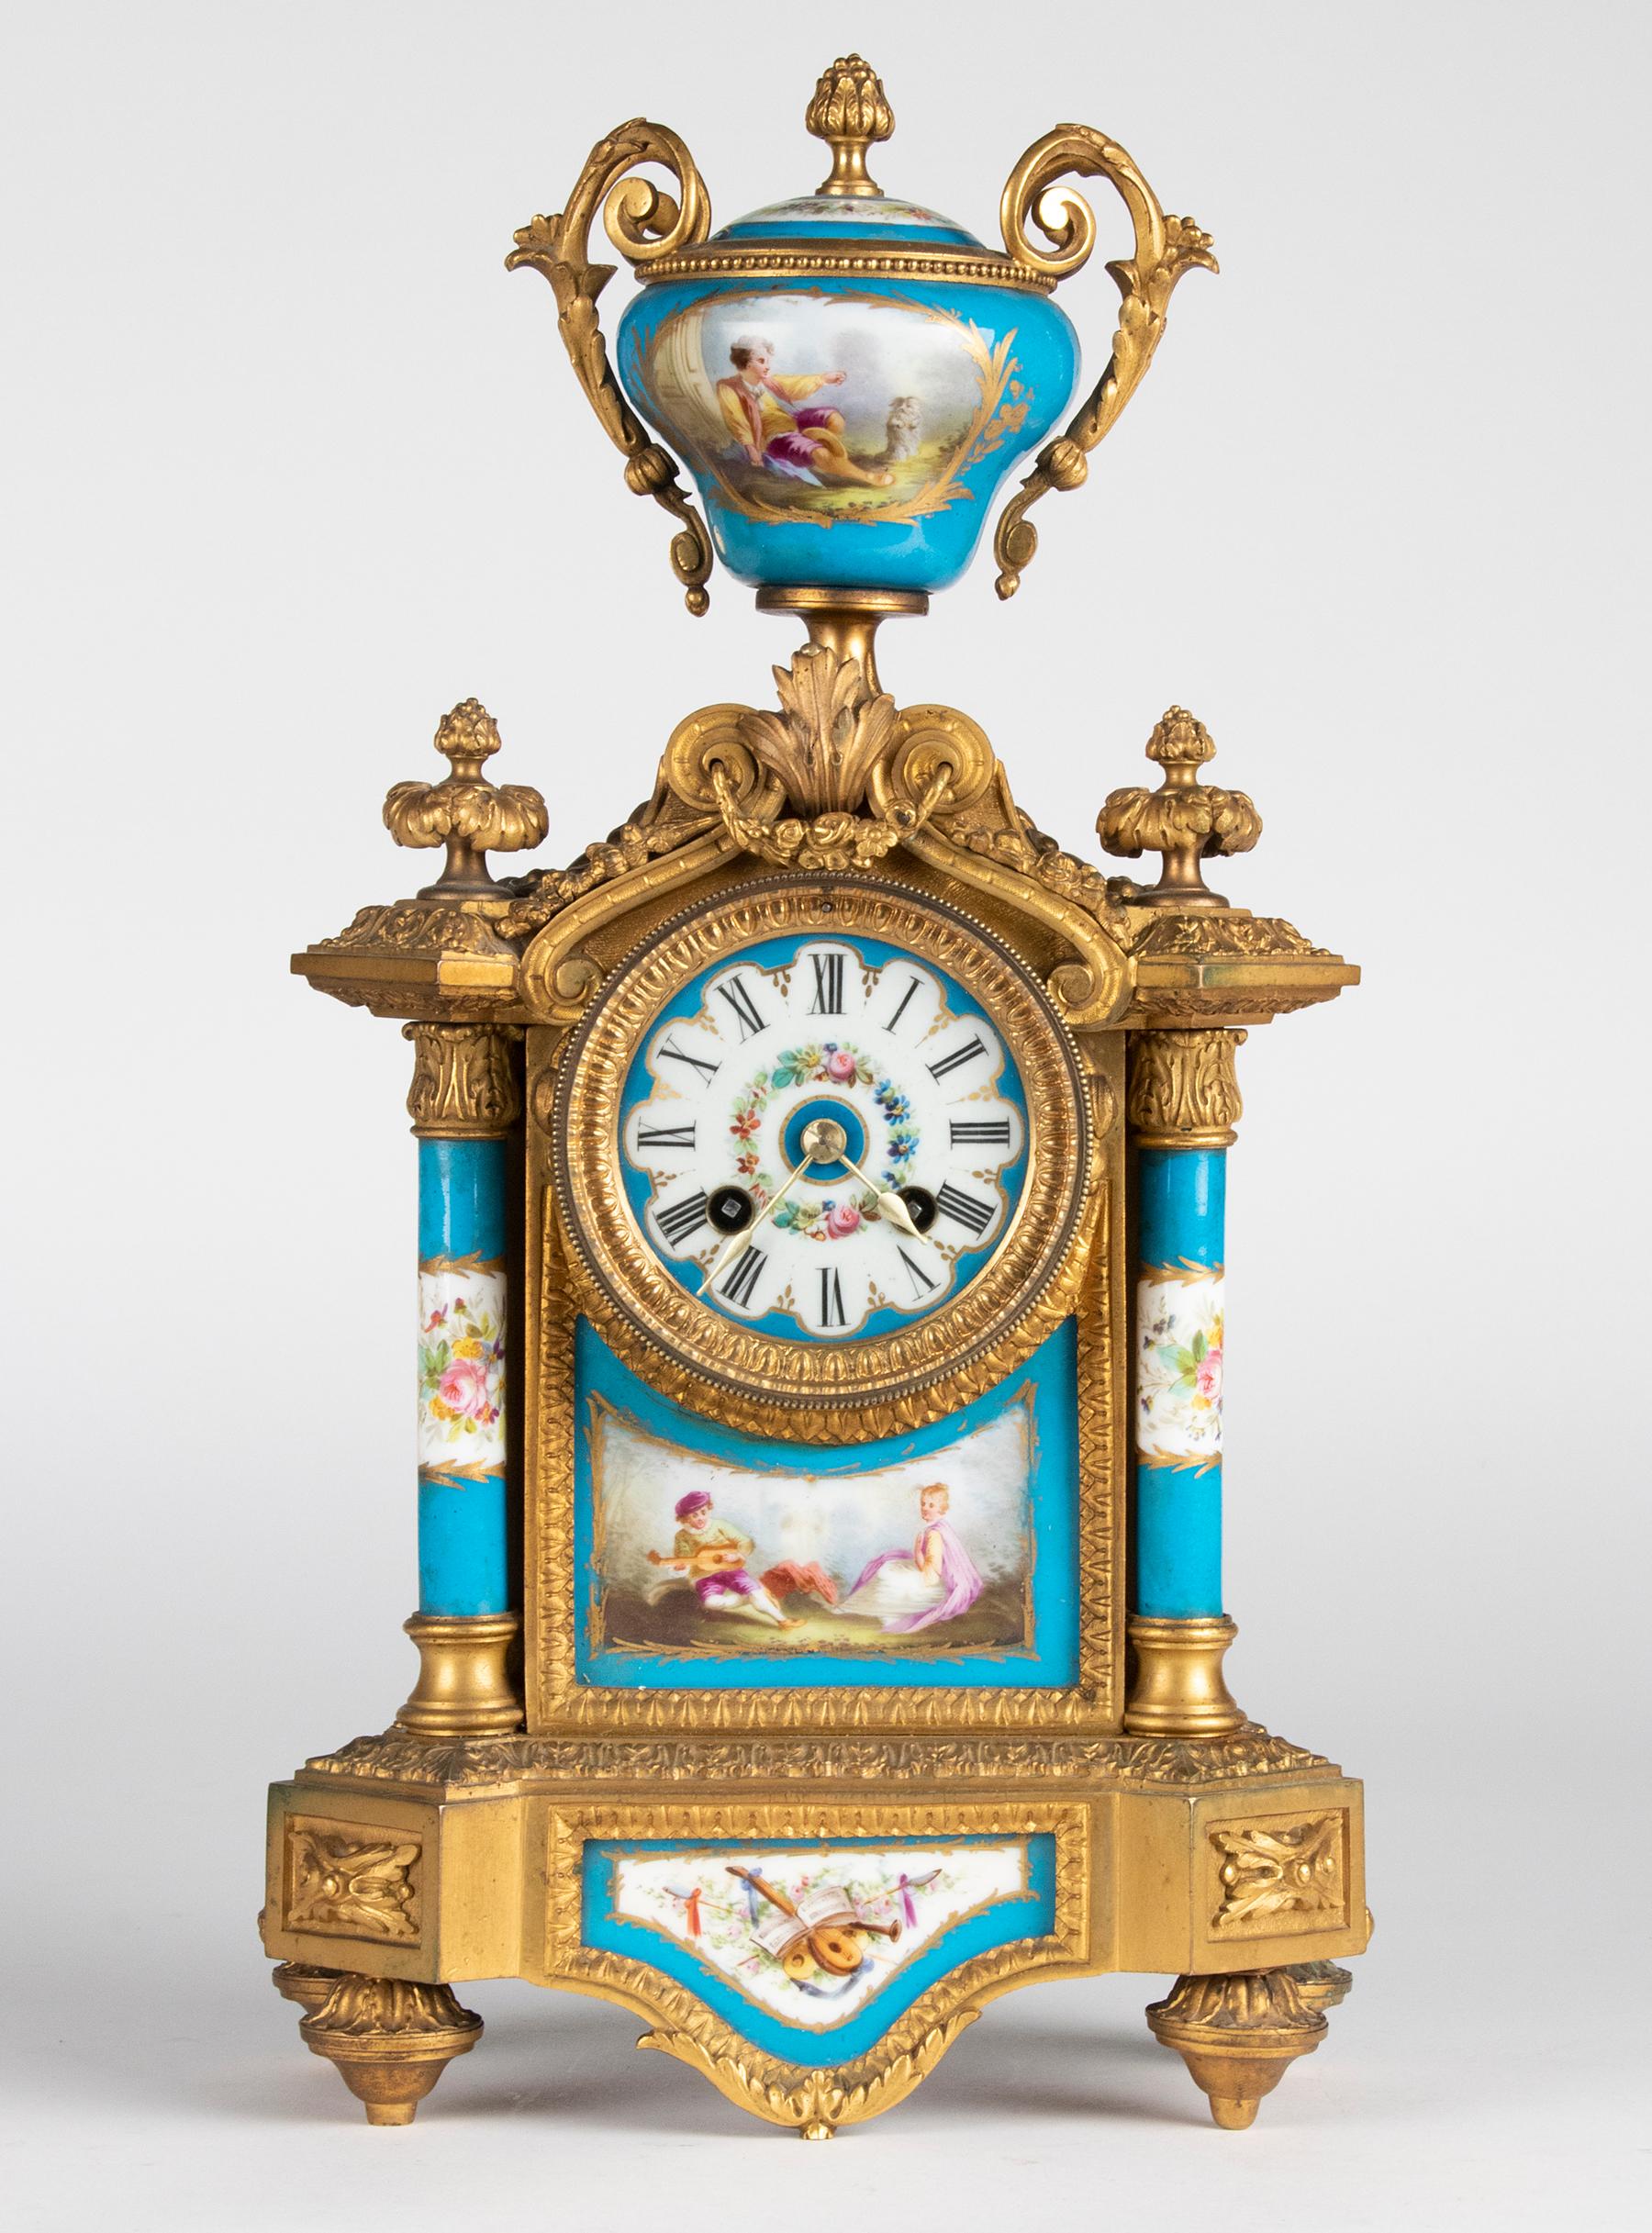 A fine quality 19th century ormolu bronze mantel clock in Louis XVI style. Decorated with Sèvres style painted porcelain. The painting is in neoclassical style, with music theme. The paintwork is of fine and beautiful quality. The case is made of